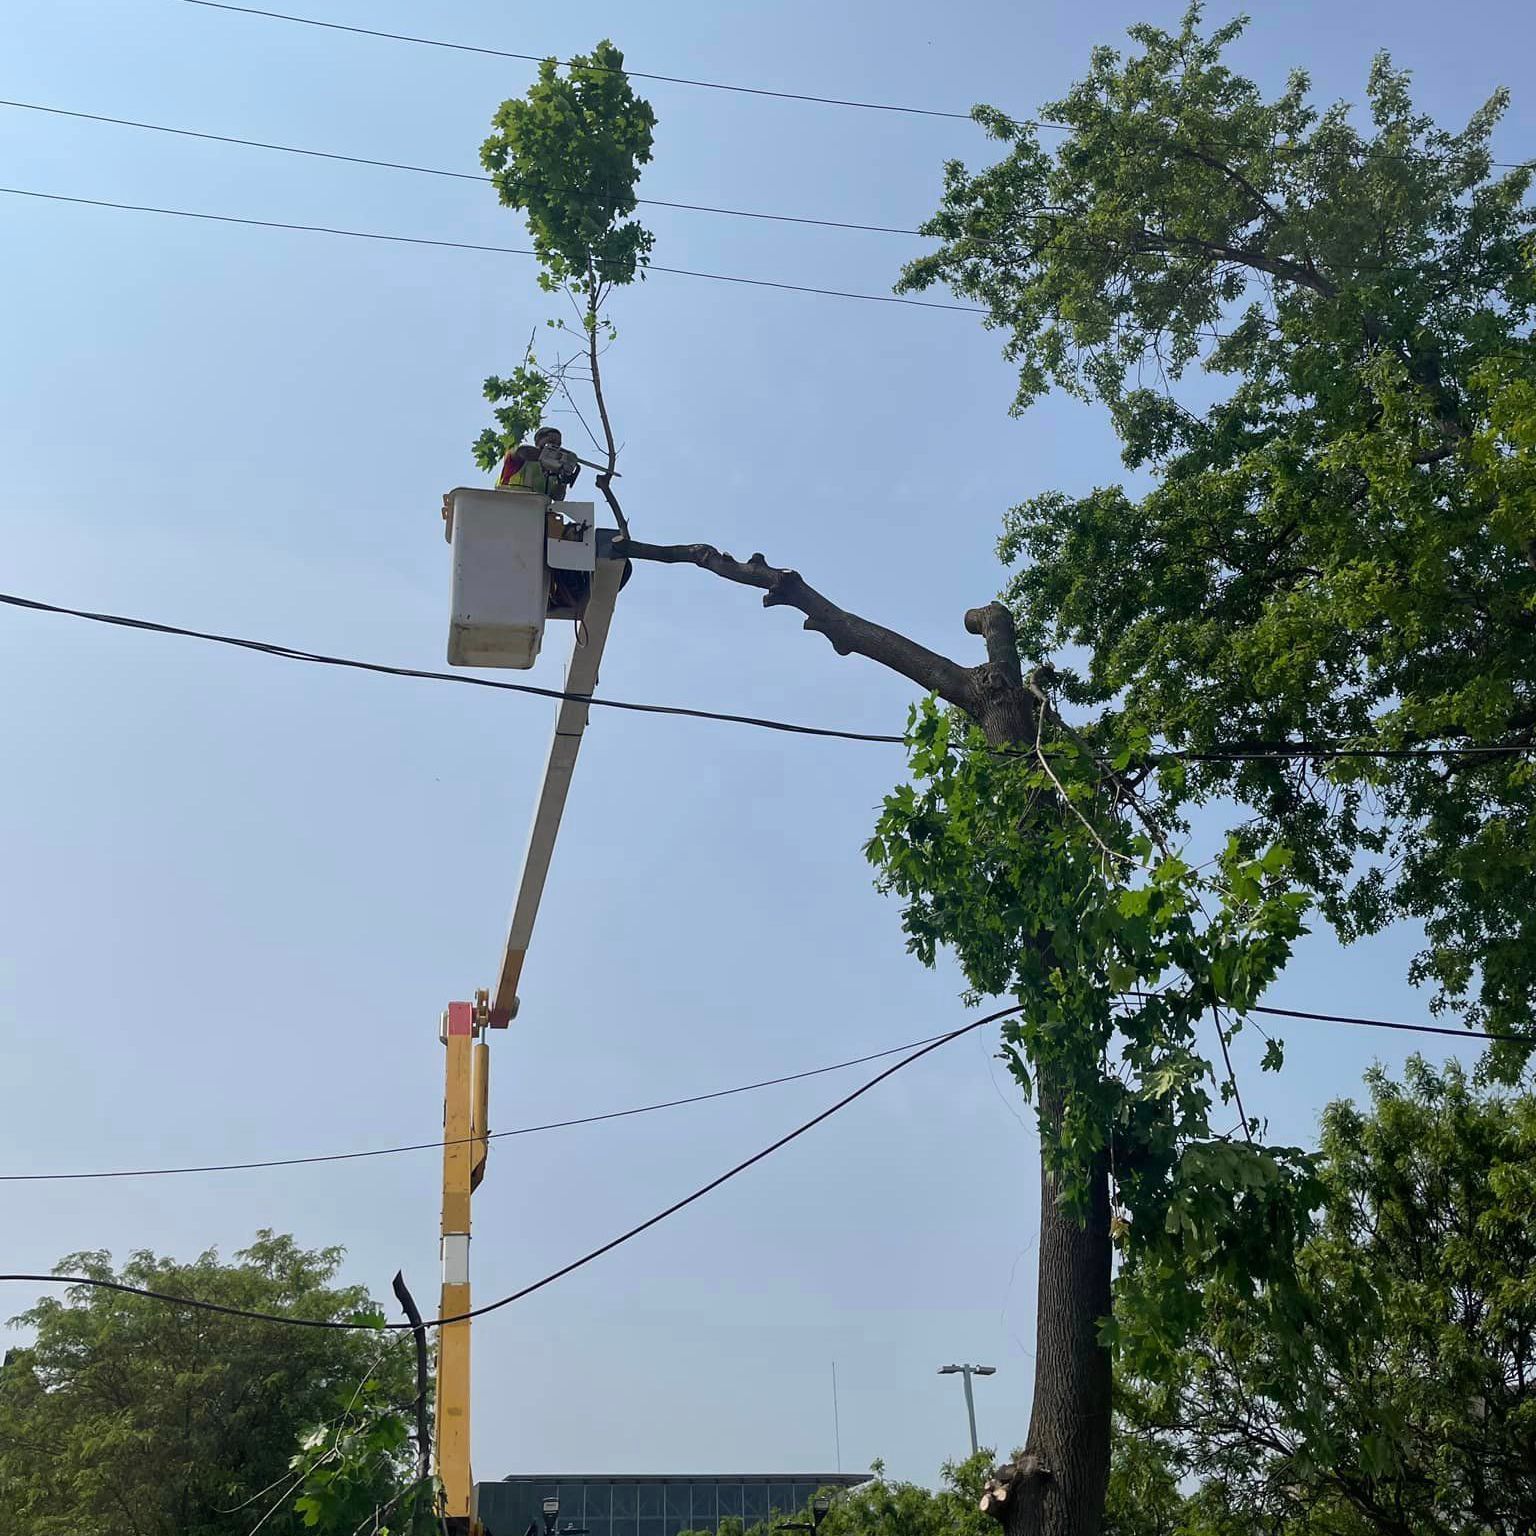 Man On Crane - Broadview Heights, OH - Timberland Tree Services